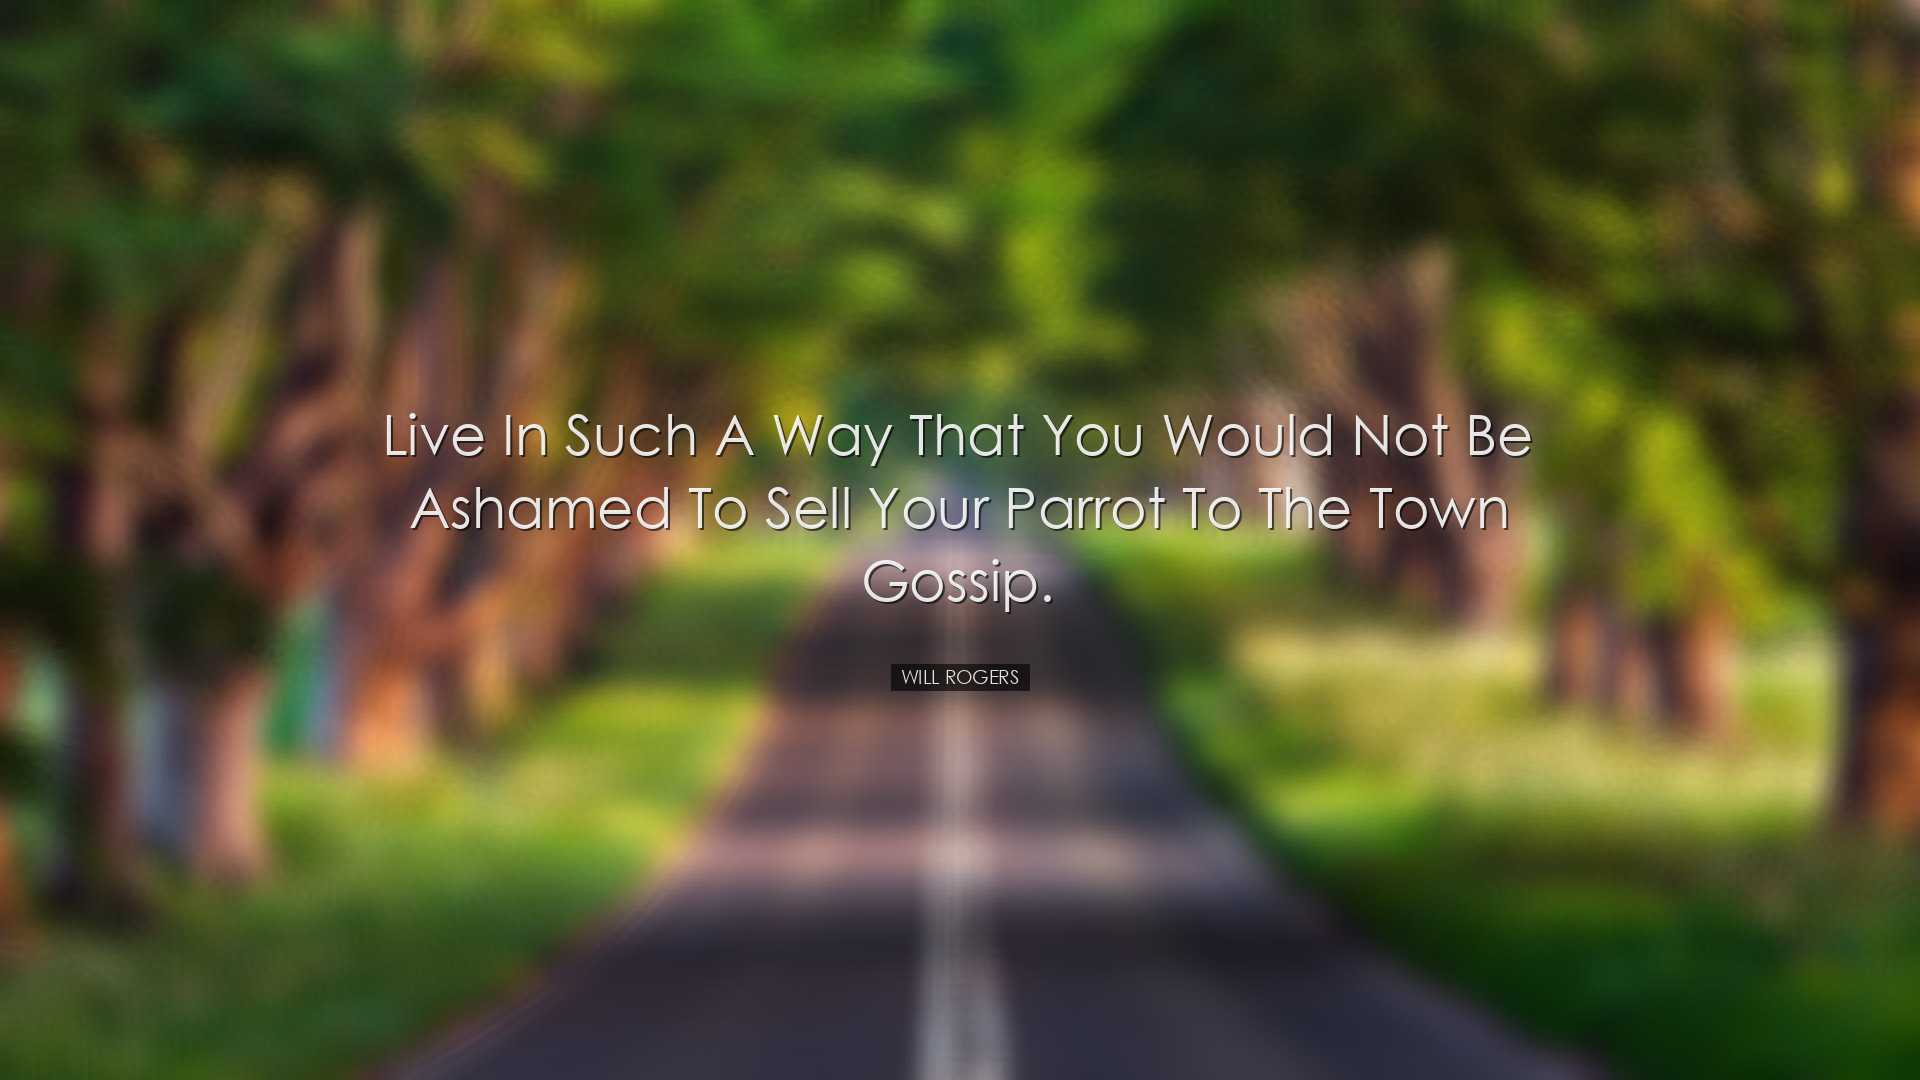 Live in such a way that you would not be ashamed to sell your parr